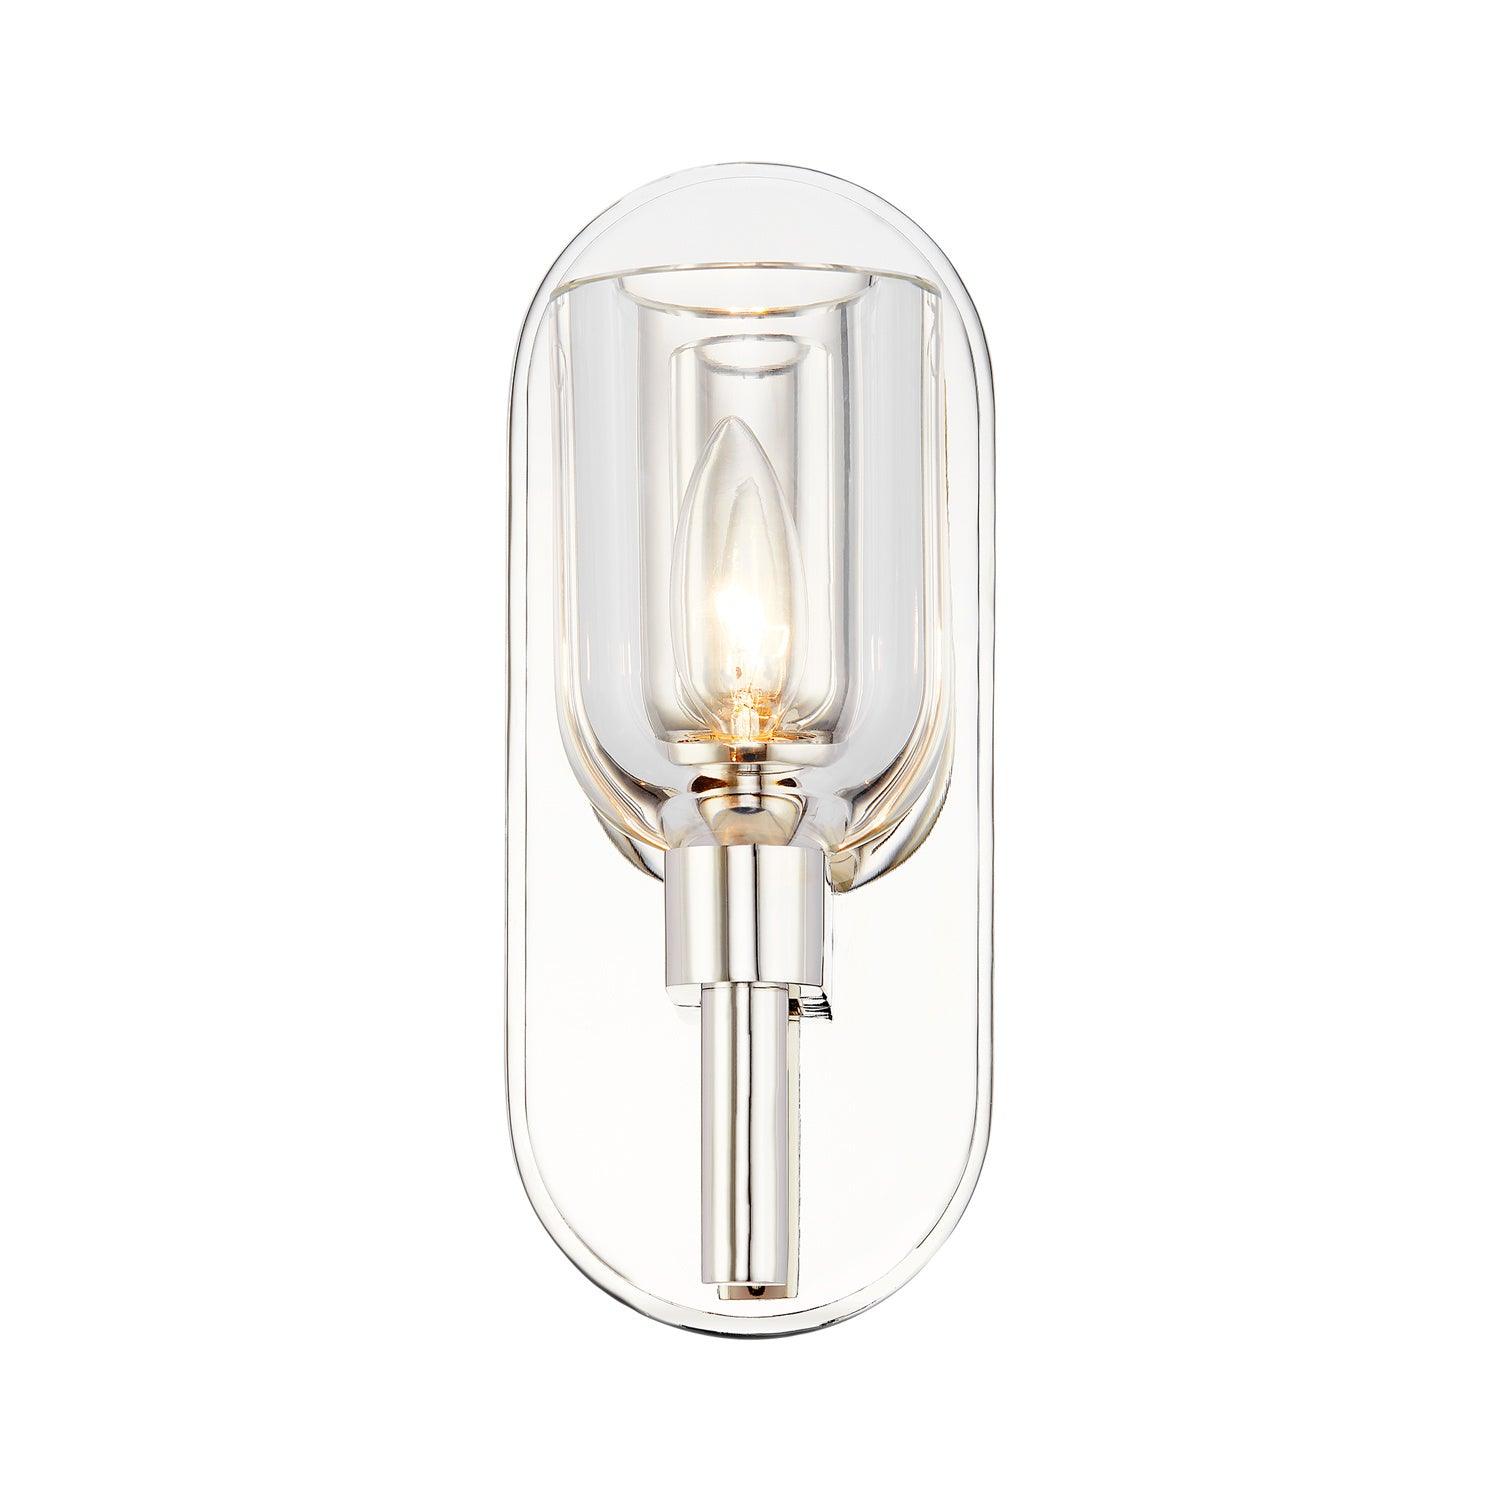 Alora Lighting - Lucian Wall Sconce - WV338101PNCC | Montreal Lighting & Hardware